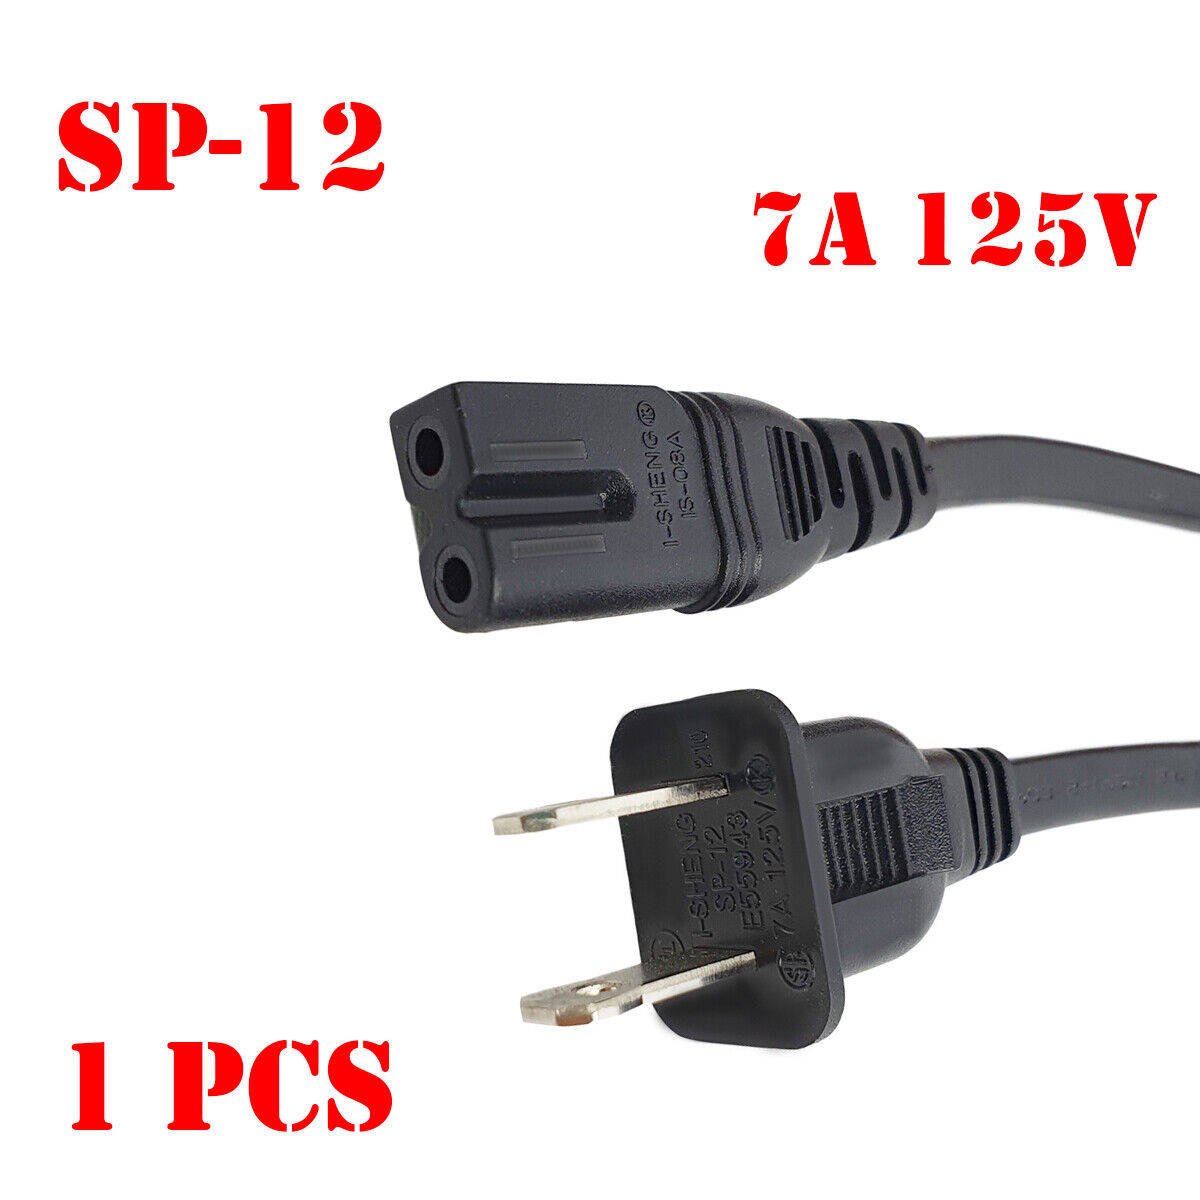 Lot of 1-100 Standard 6ft 2-Prong AC Power Cord/Cable Polarized SP-12 7A 125V